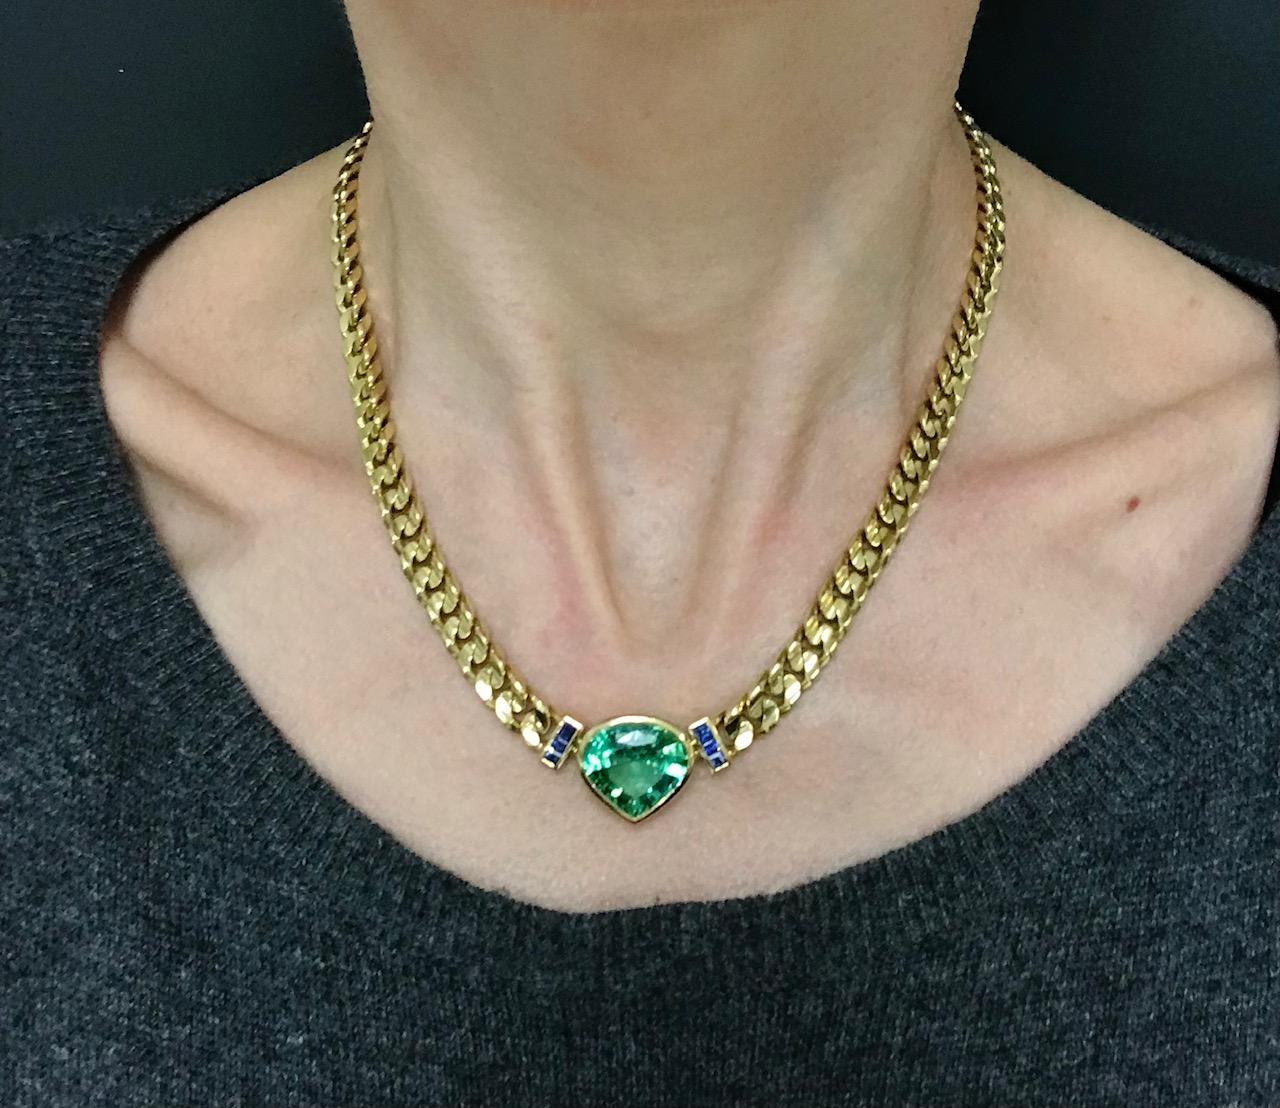 A spectacular Bulgari 18k gold chain necklace features tourmaline and sapphire. The chain is 
Every detail of this necklace is significant. The curb link chain has a curve in the middle making it look unusual.
The clasp features a bezel set diamond.